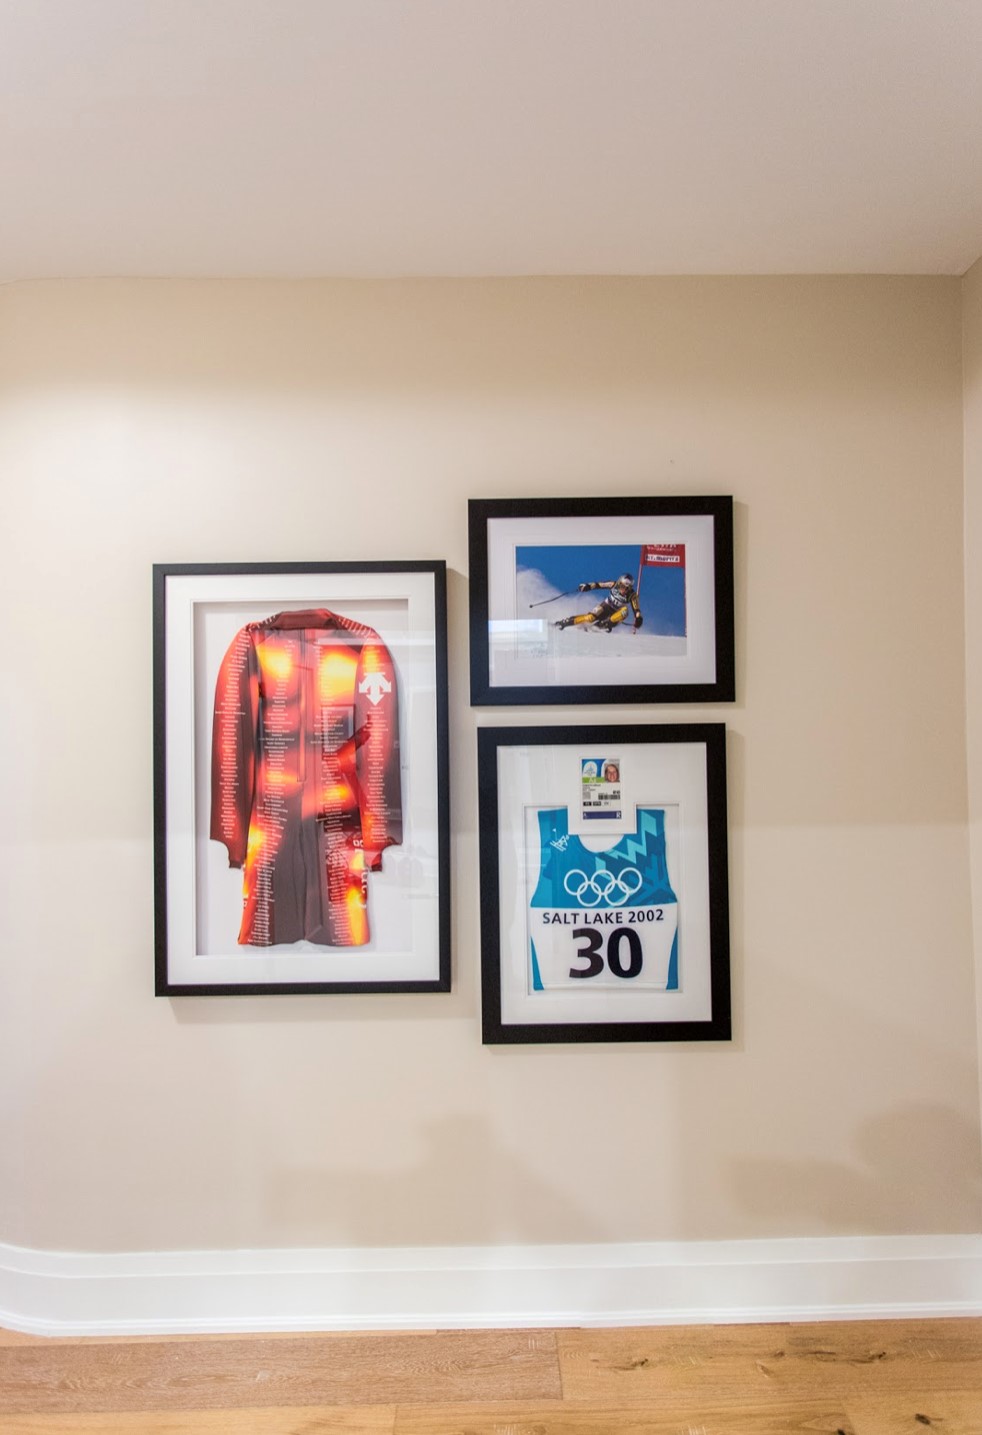 Three pieces of framed photography and memorabilia